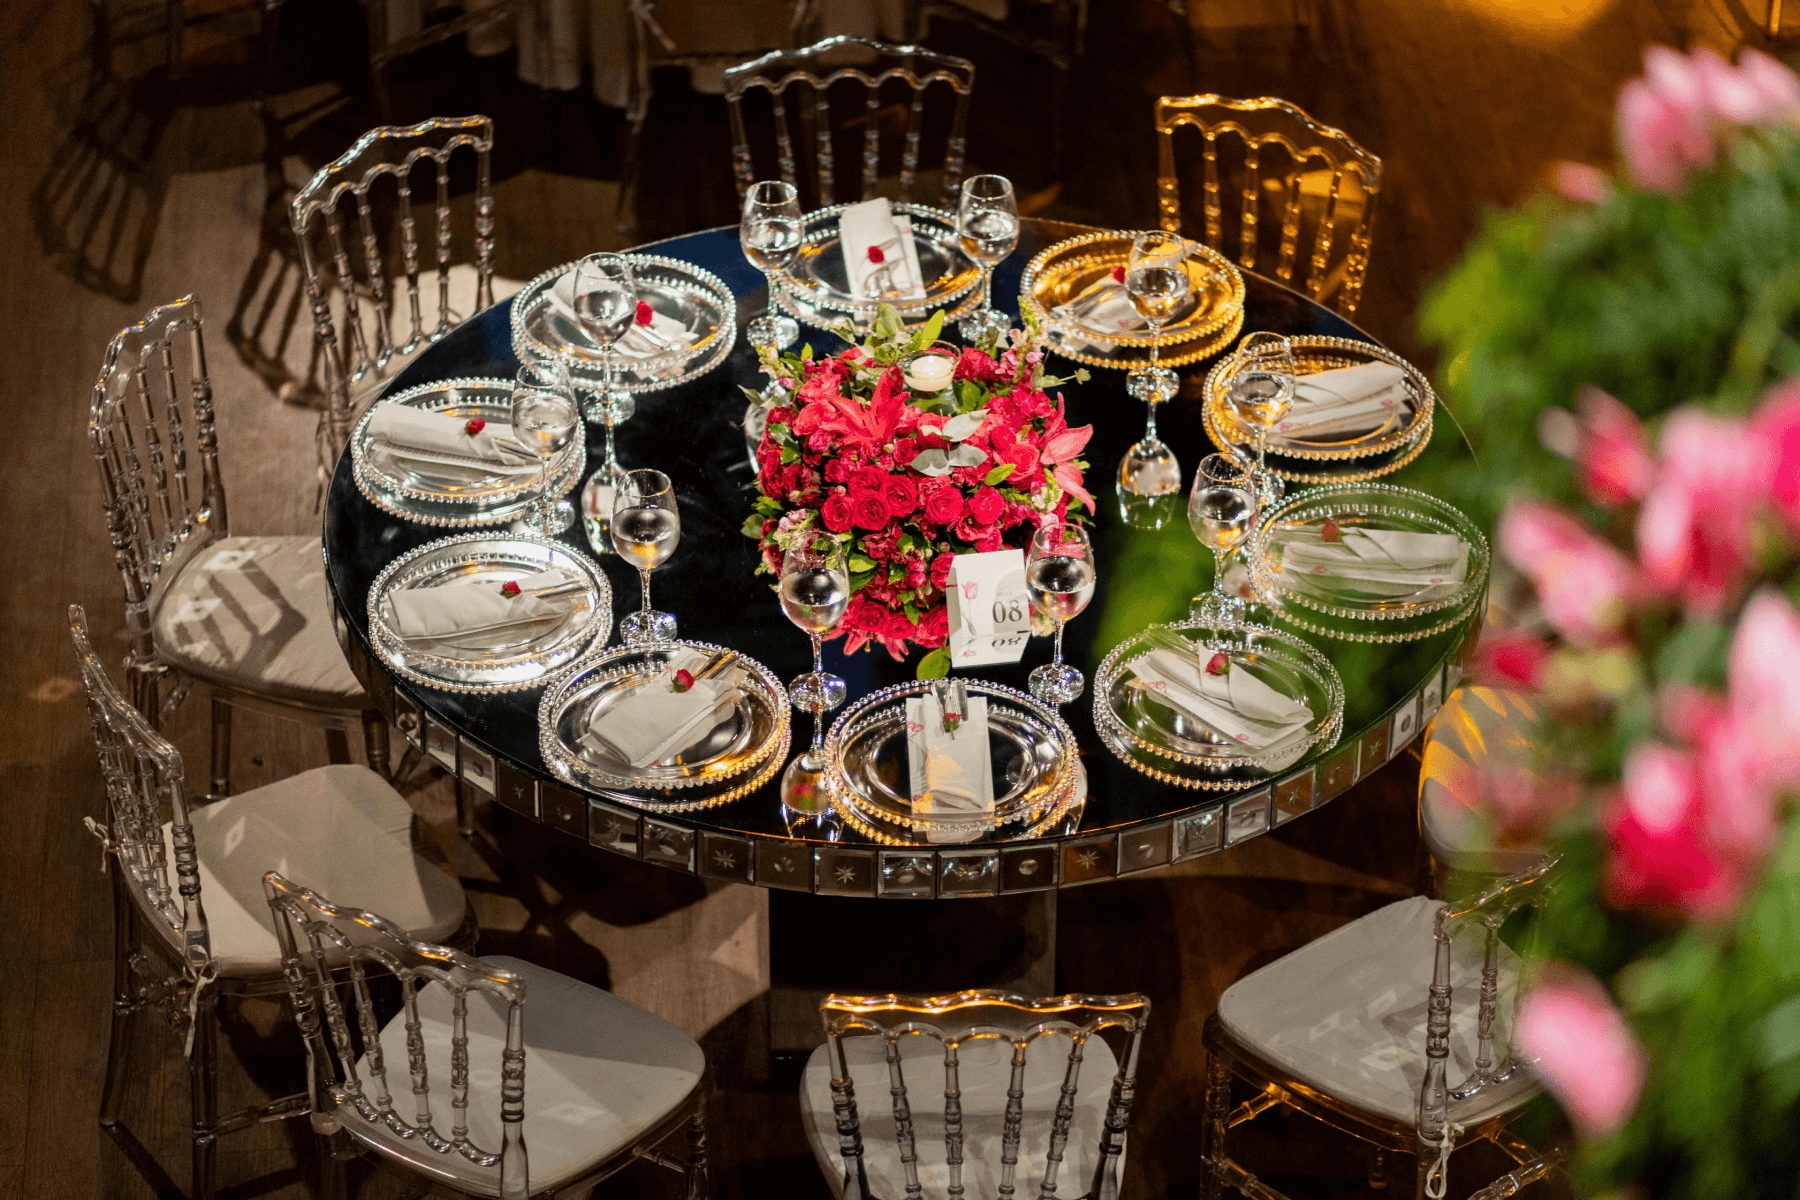 A round table set for a formal dinner surrounded by metallic chairs.